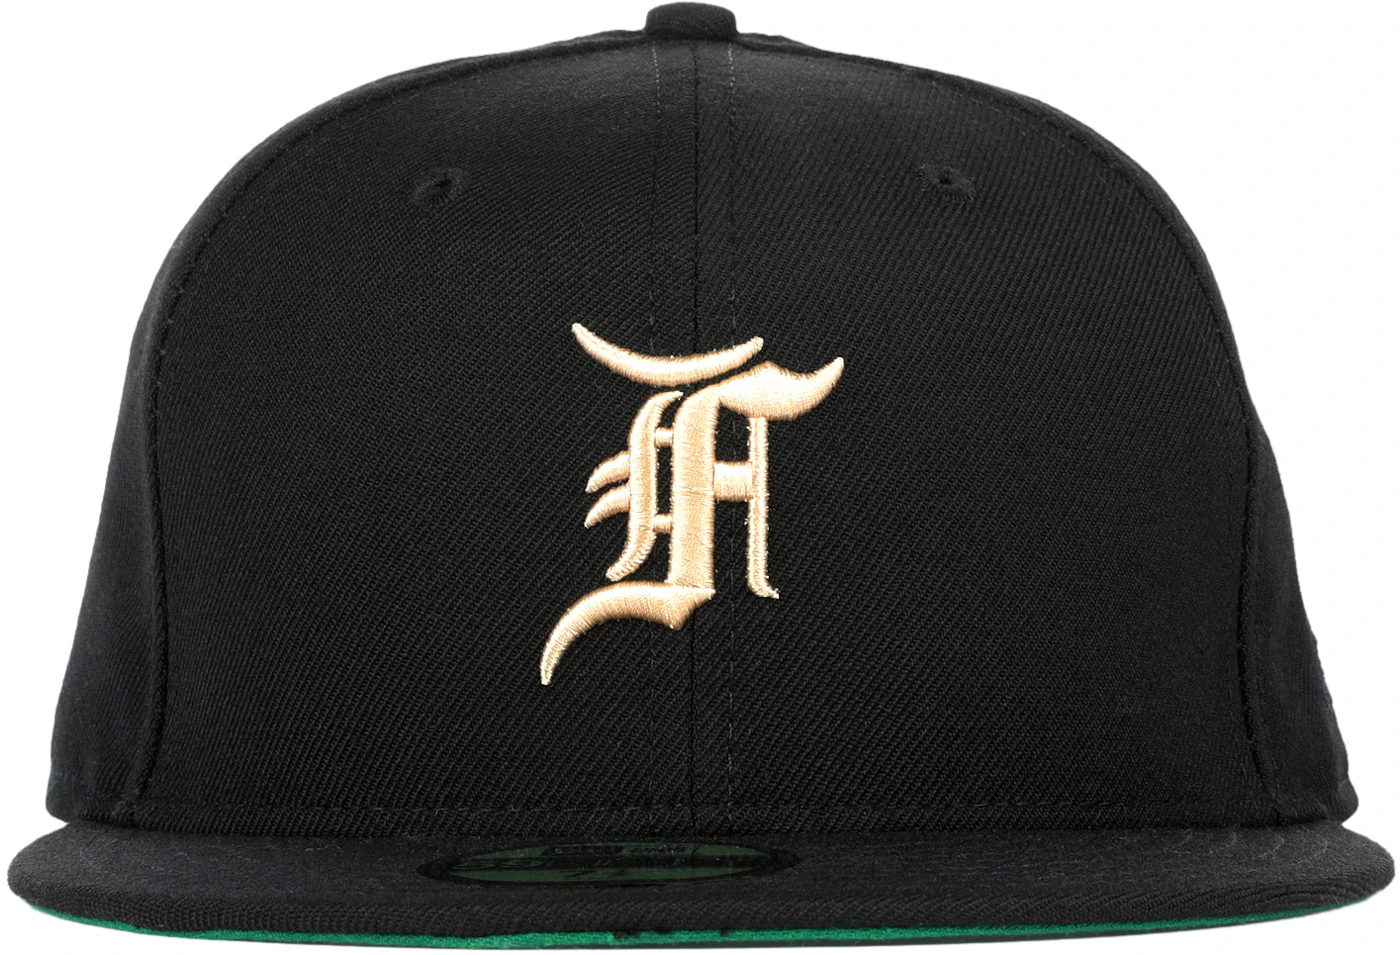 Black/Cream - FEAR OF Jay-Z - Fitted New GOD Era US Cap Fifth Hat Collection